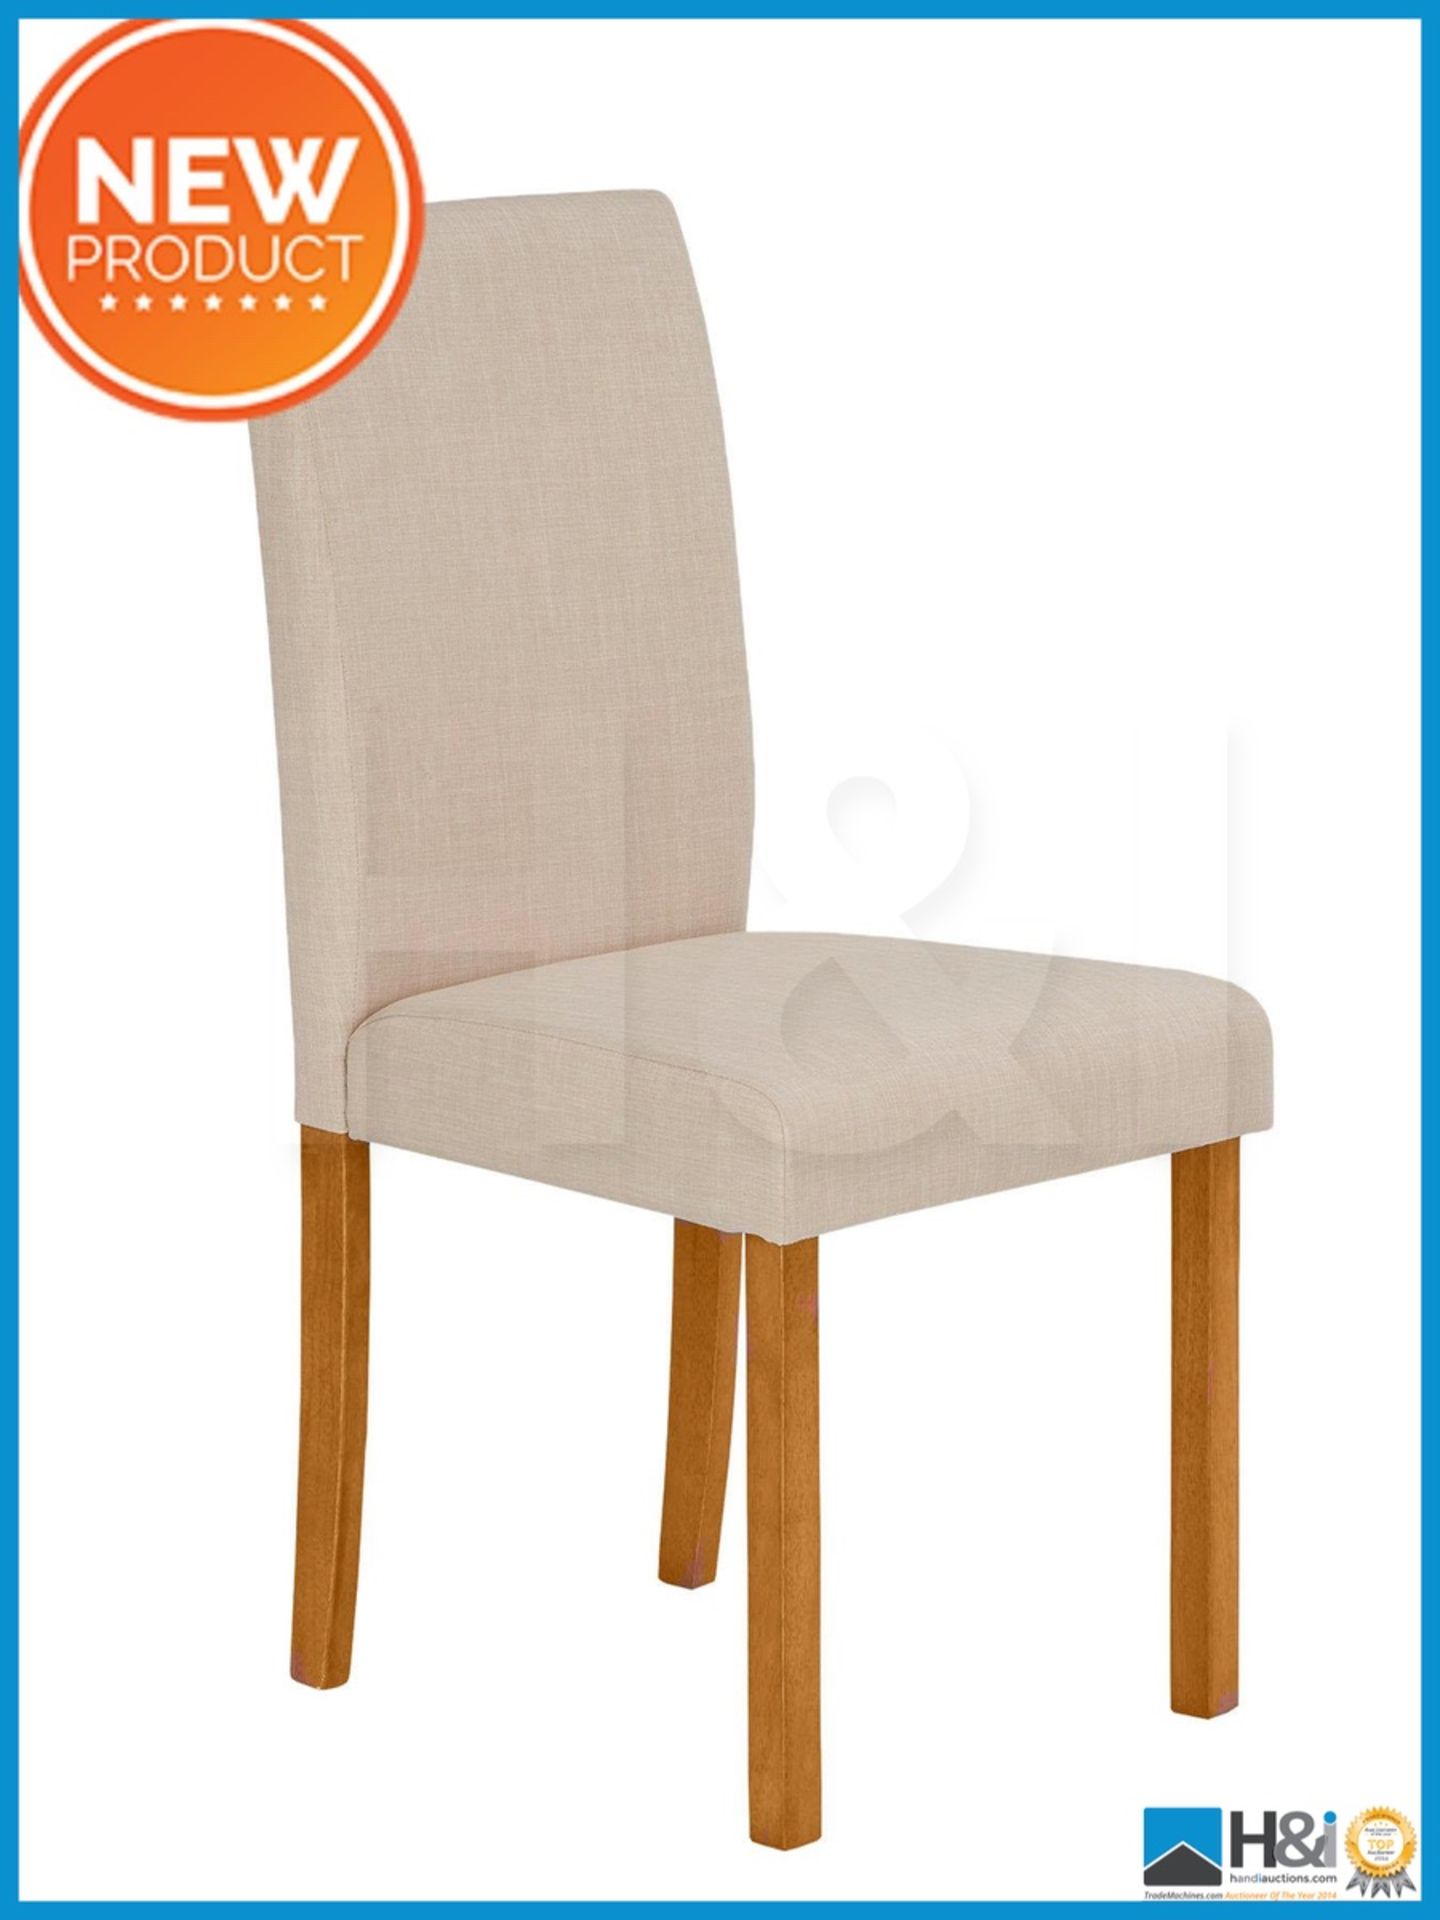 NEW IN BOX PRIMO PAIR DINING CHAIRS [CREAM/OAK] 90 x 43 x 53cm RRP £129 Appraisal: Viewing Essential